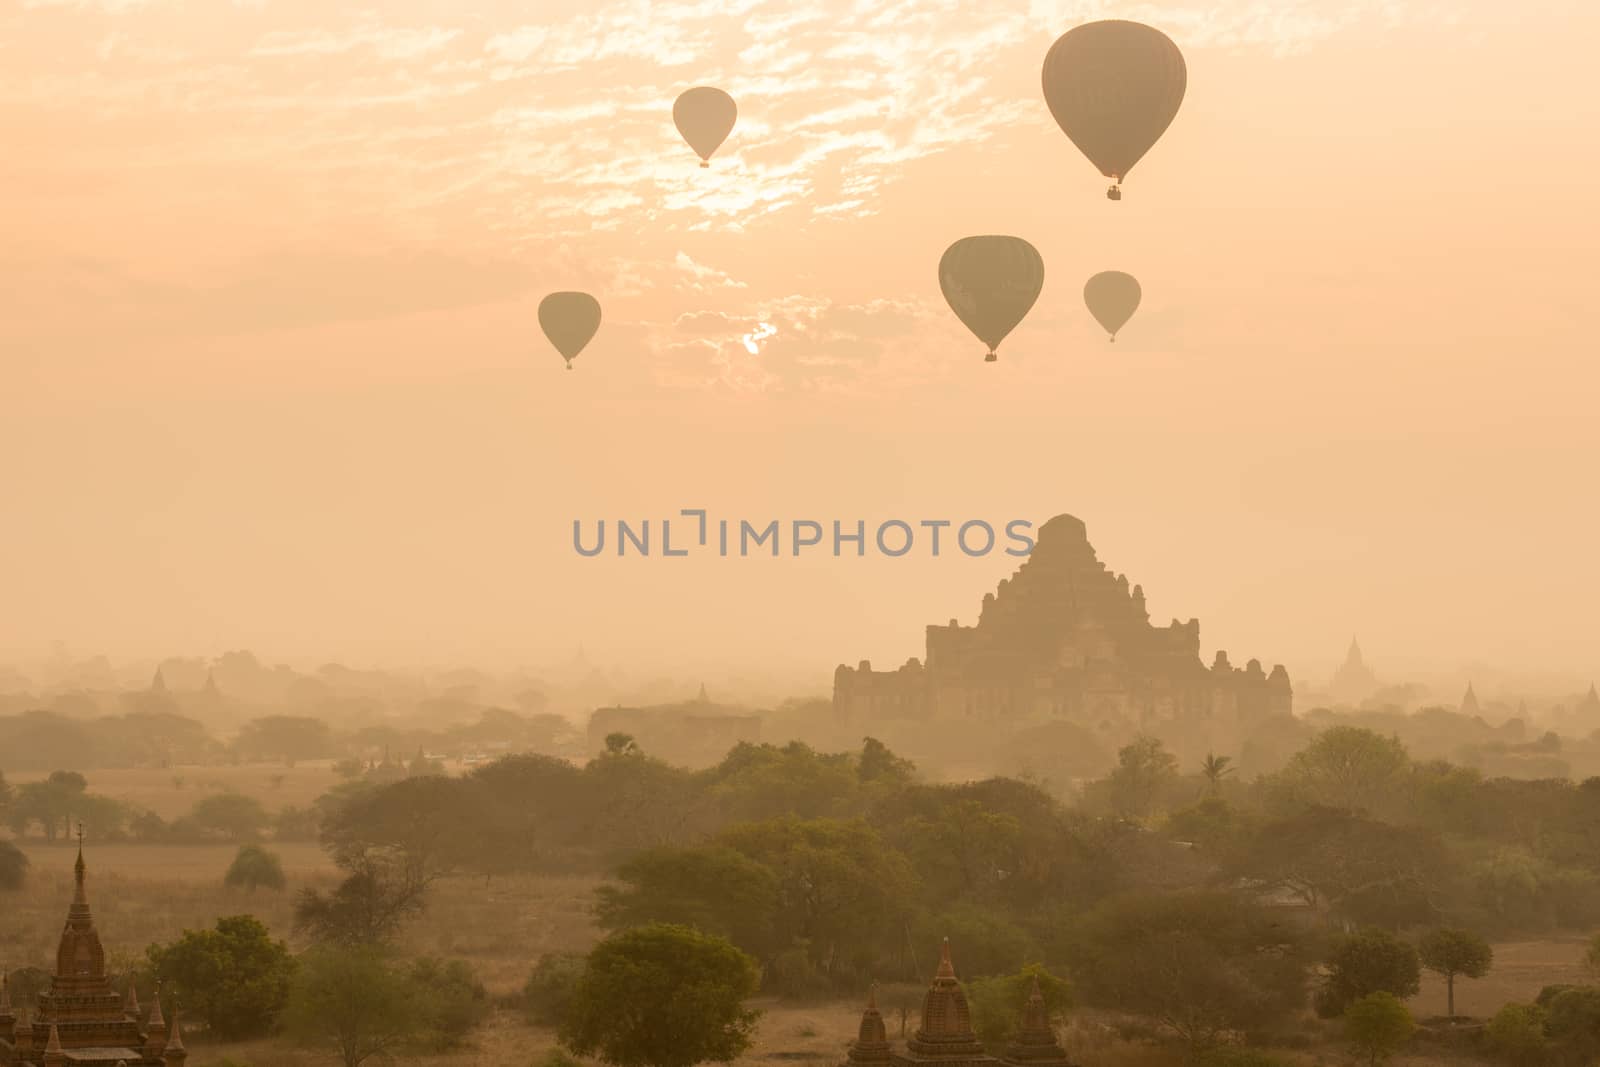 Dhammayangyi temple The biggest Temple in Bagan with balloons and sunrise, Myanmar